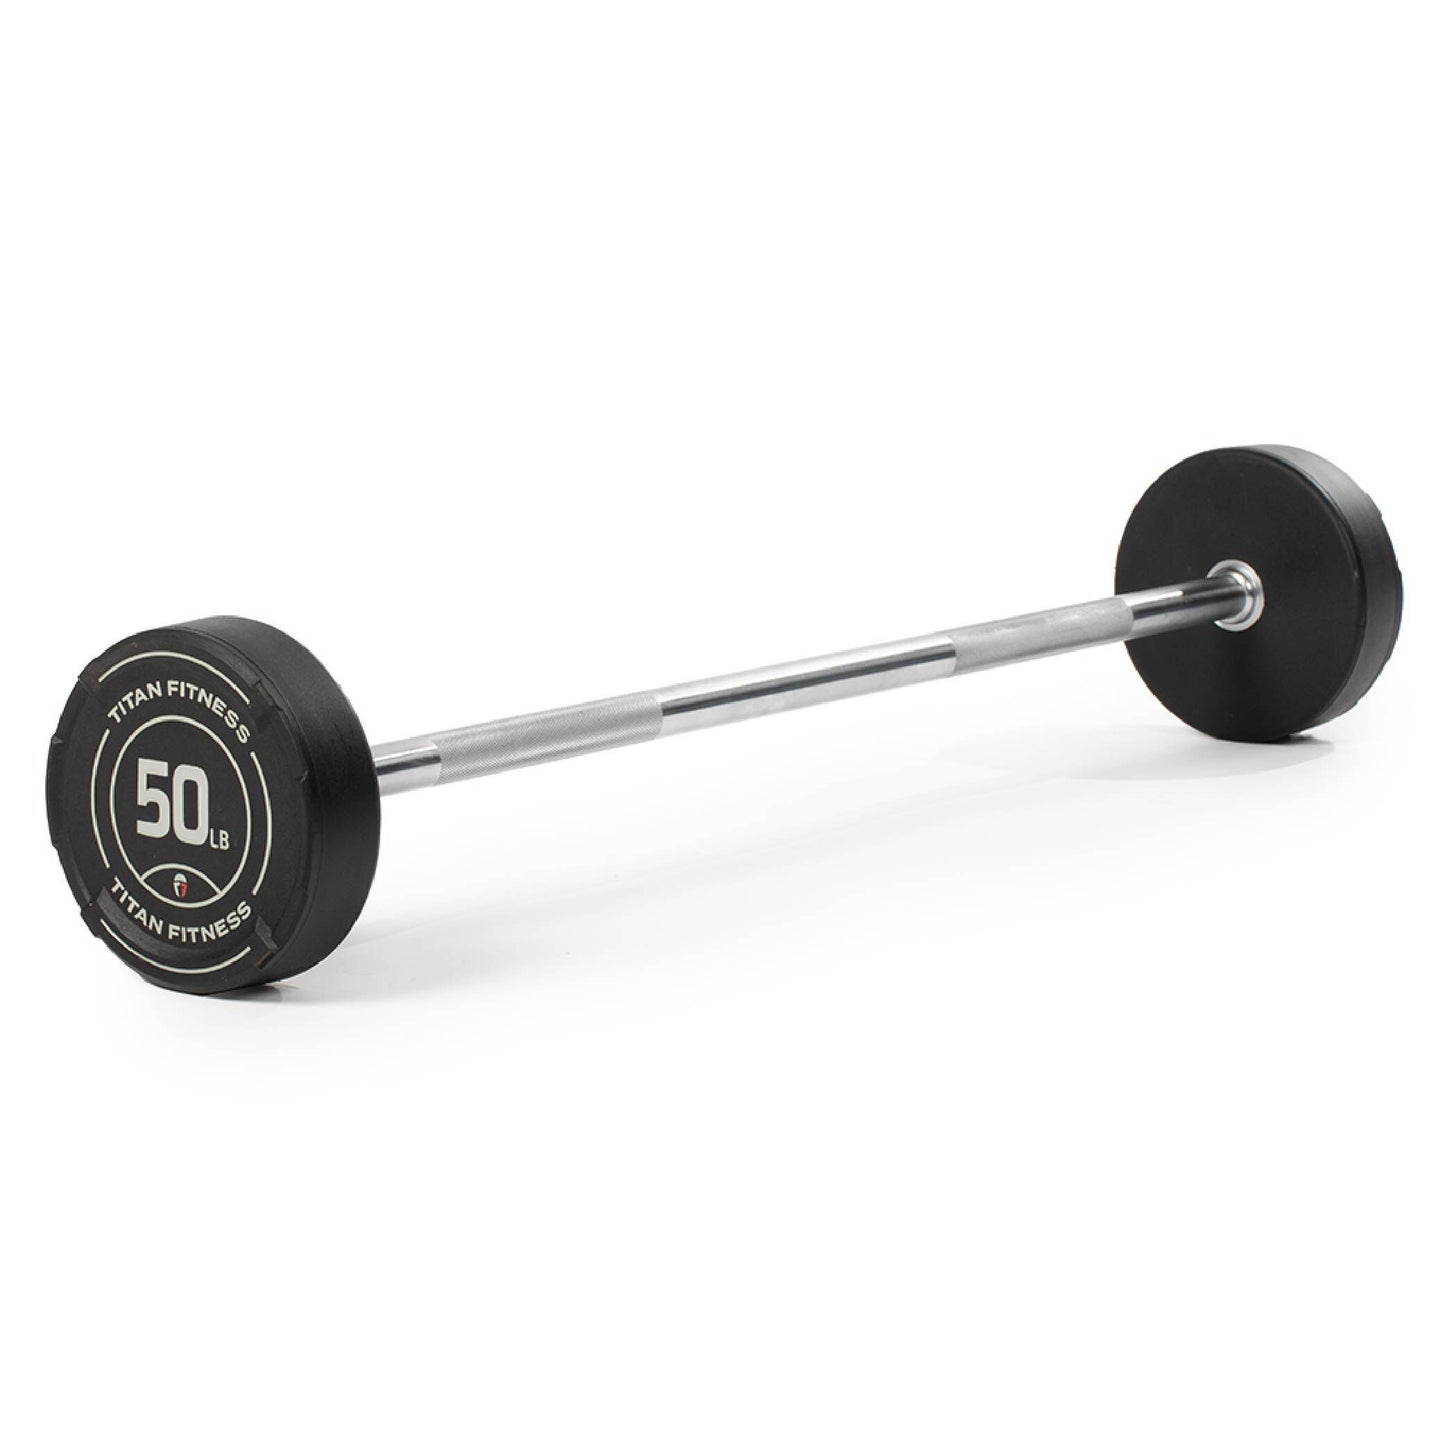 50 LB Straight Fixed Rubber Barbell - view 1